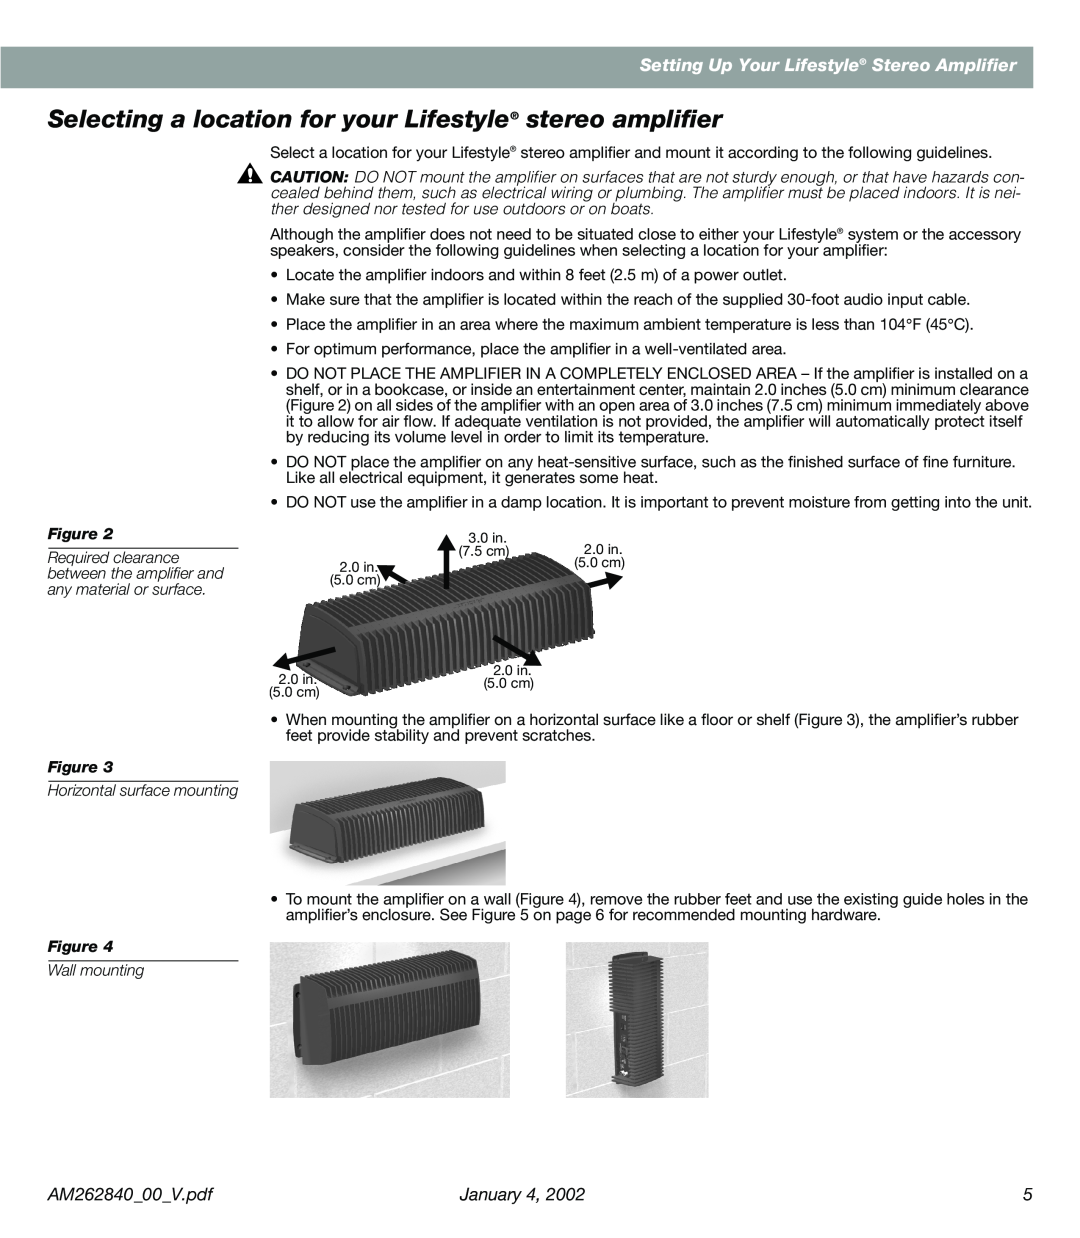 Bose AM262840 manual Setting Up Your Lifestyle Stereo Amplifier, January, Horizontal surface mounting, Wall mounting 